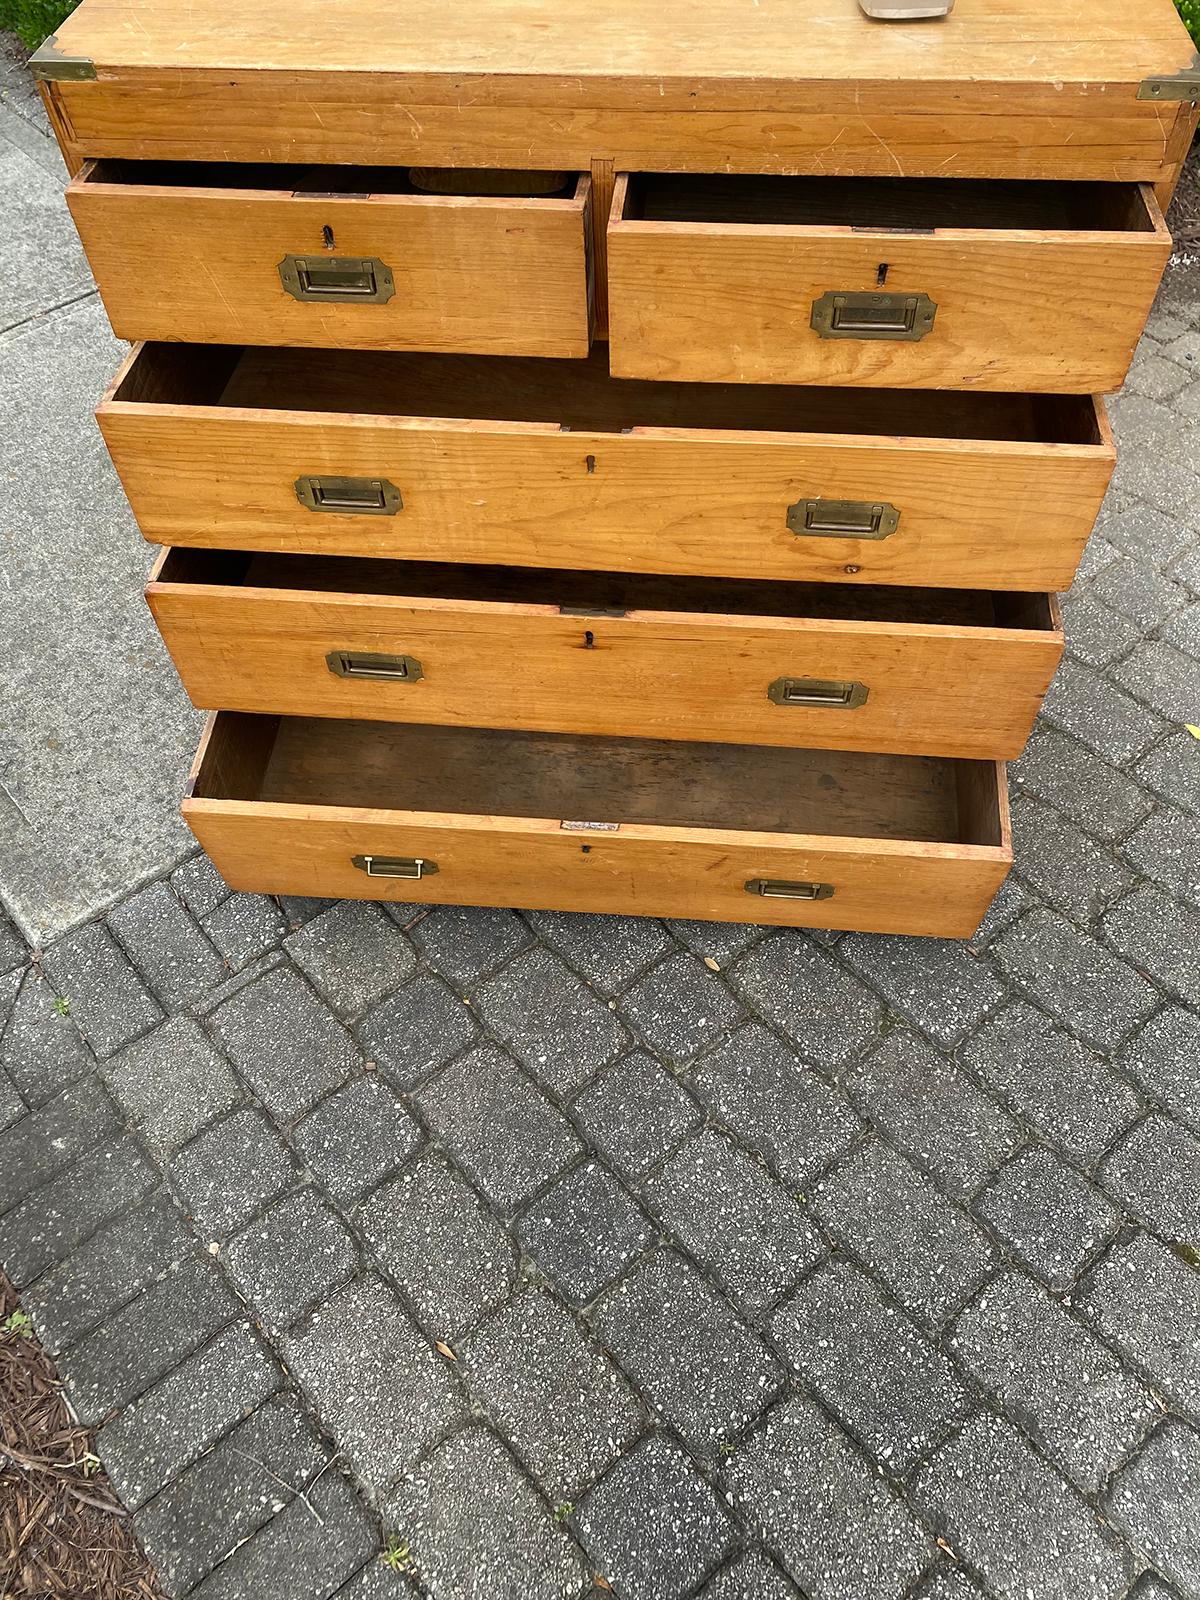 Circa 1880s-1890s English Pine Campaign Chest of Drawers For Sale 9